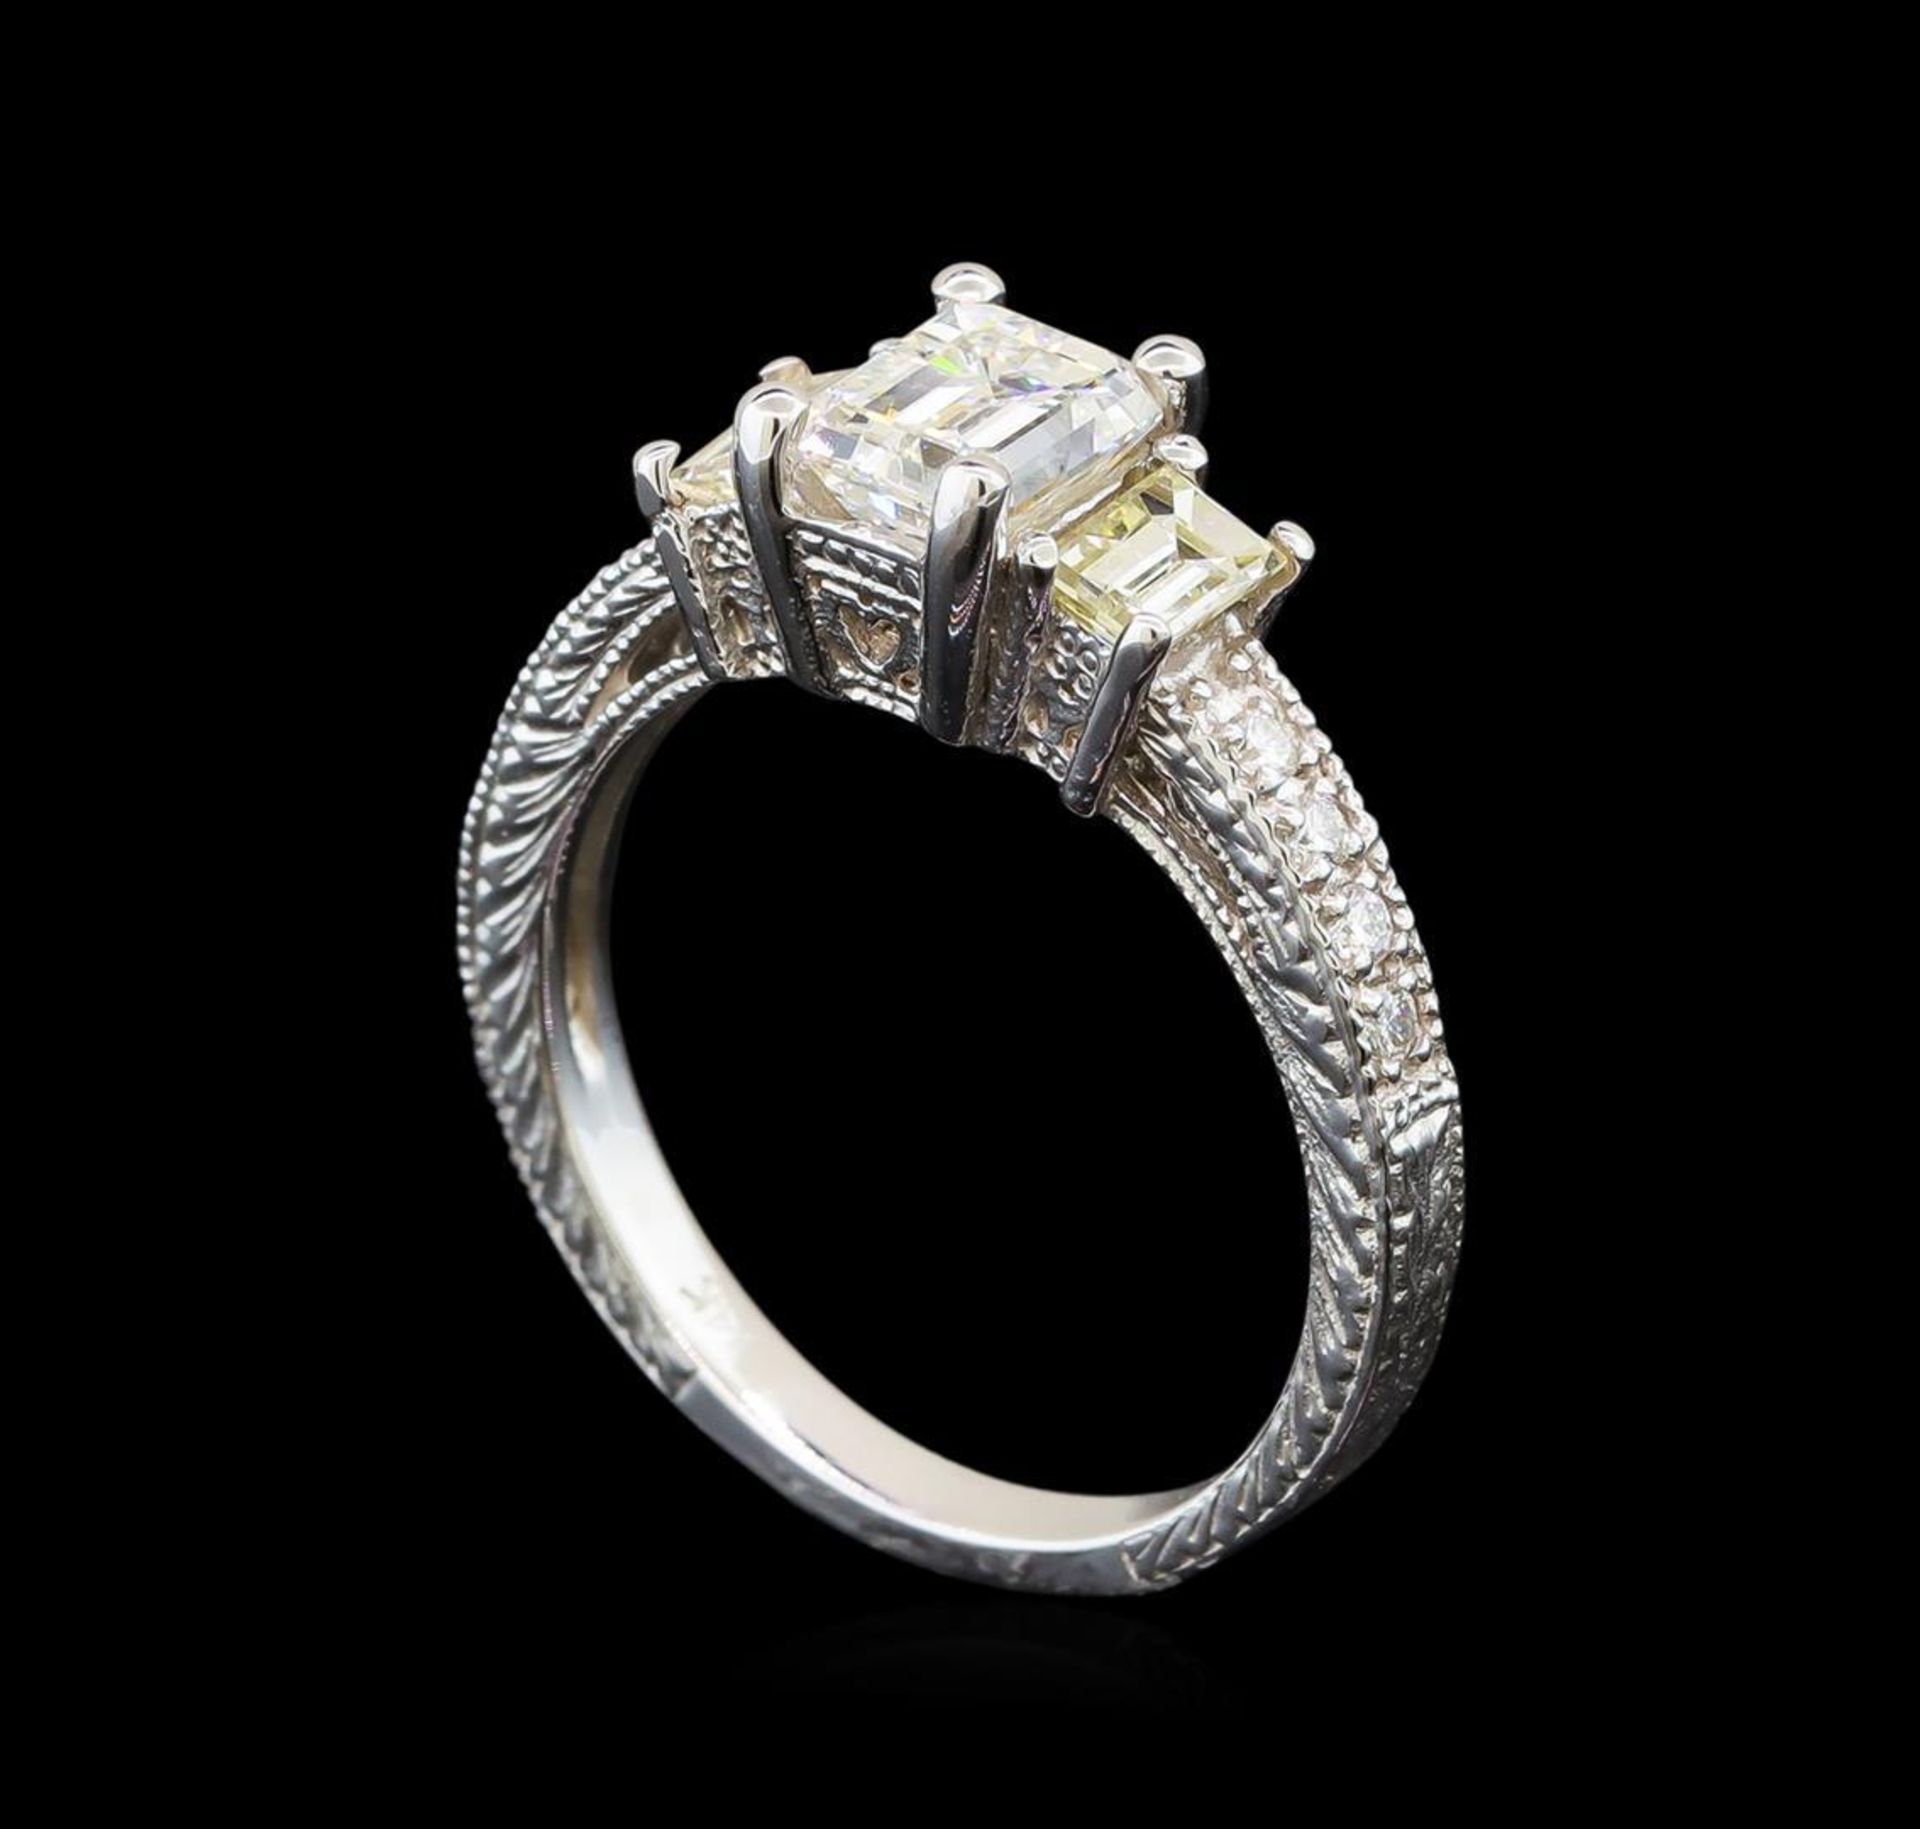 14KT White Gold EGL USA Certified 1.55 ctw Diamond Ring - Image 4 of 6